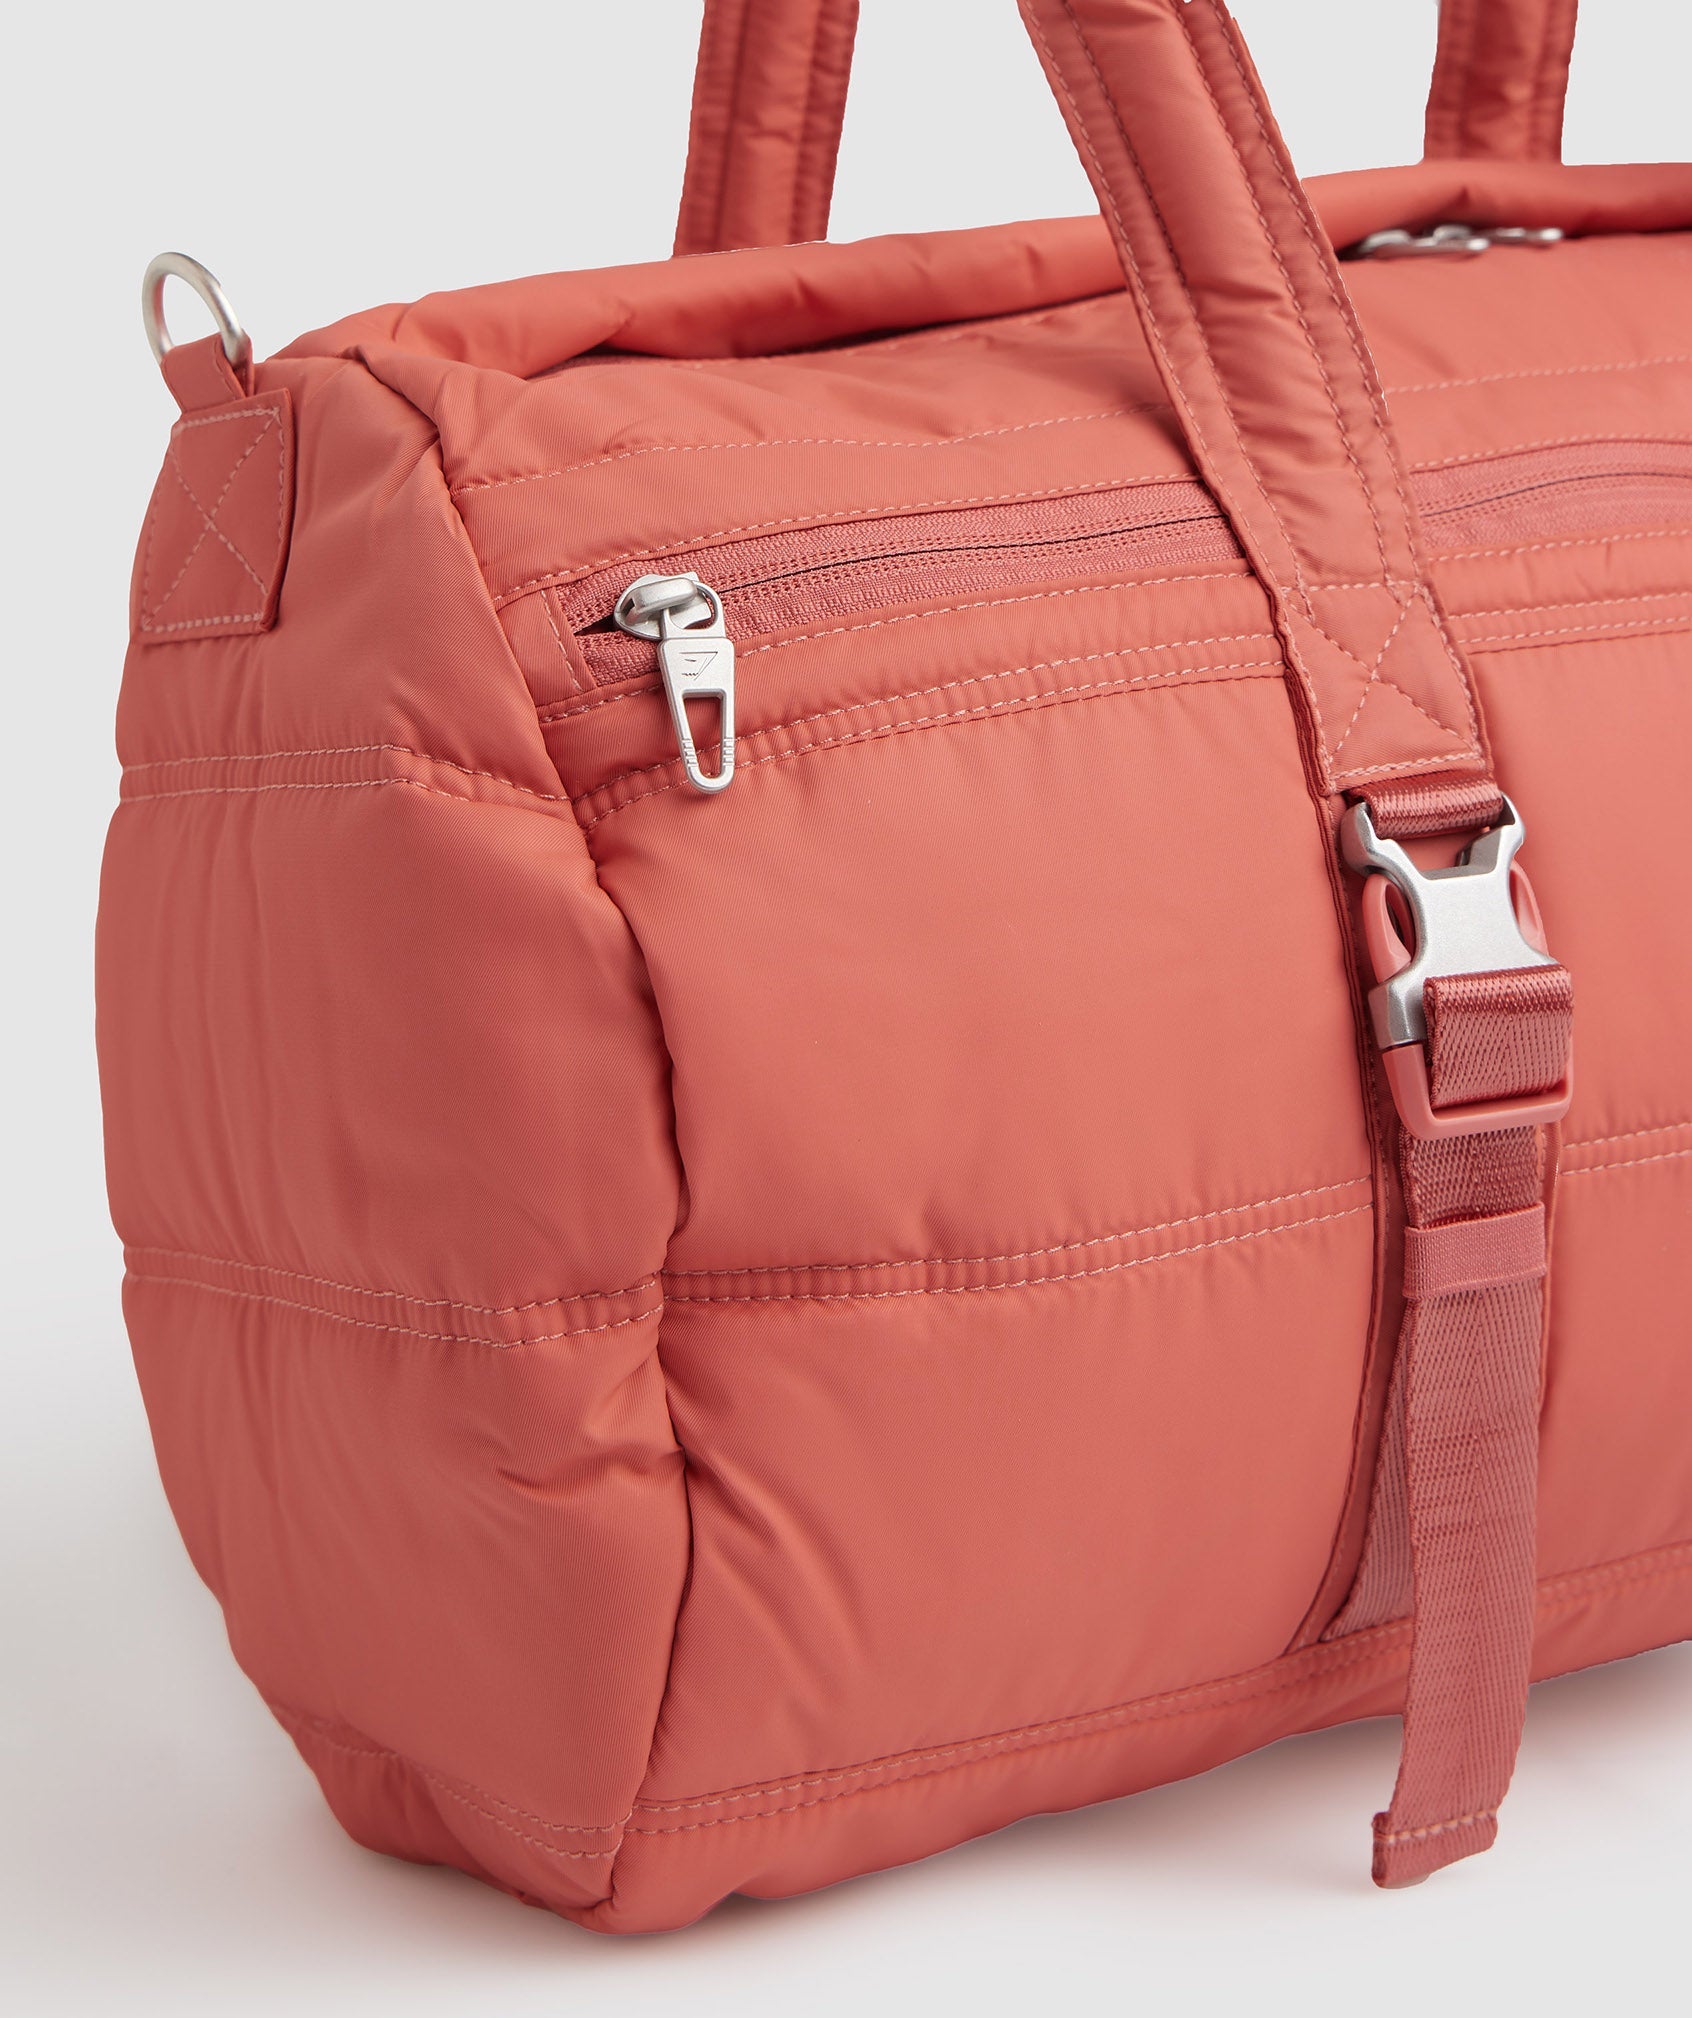 Lifestyle Barrel Bag in Terracotta Pink - view 2